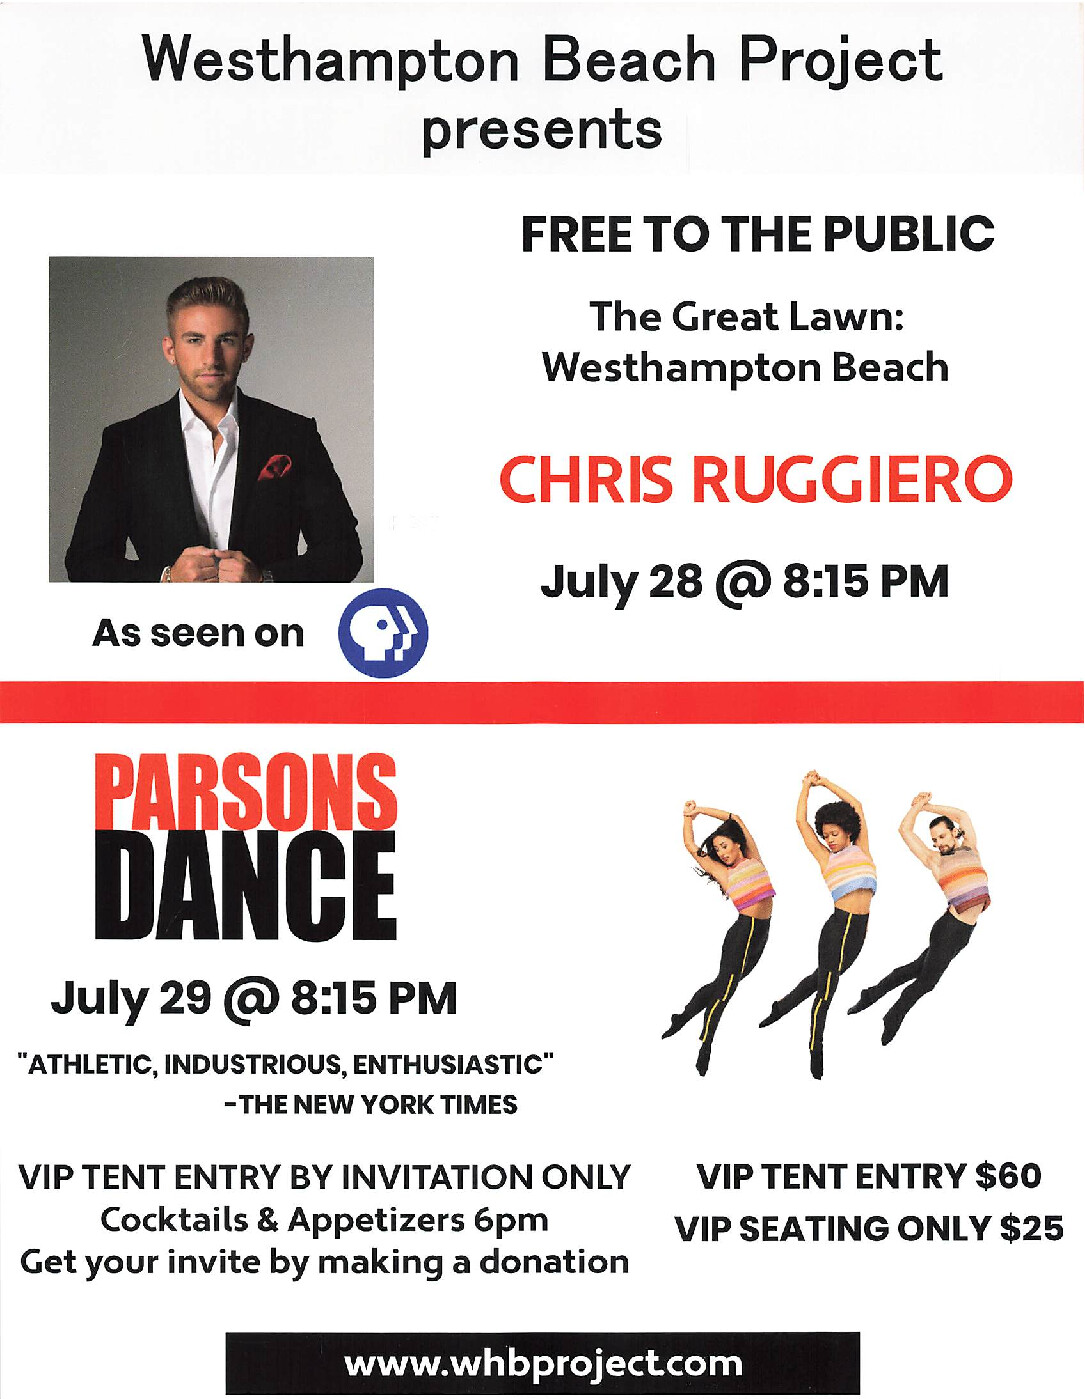 The Westhampton Beach Project Presents Parsons Dance